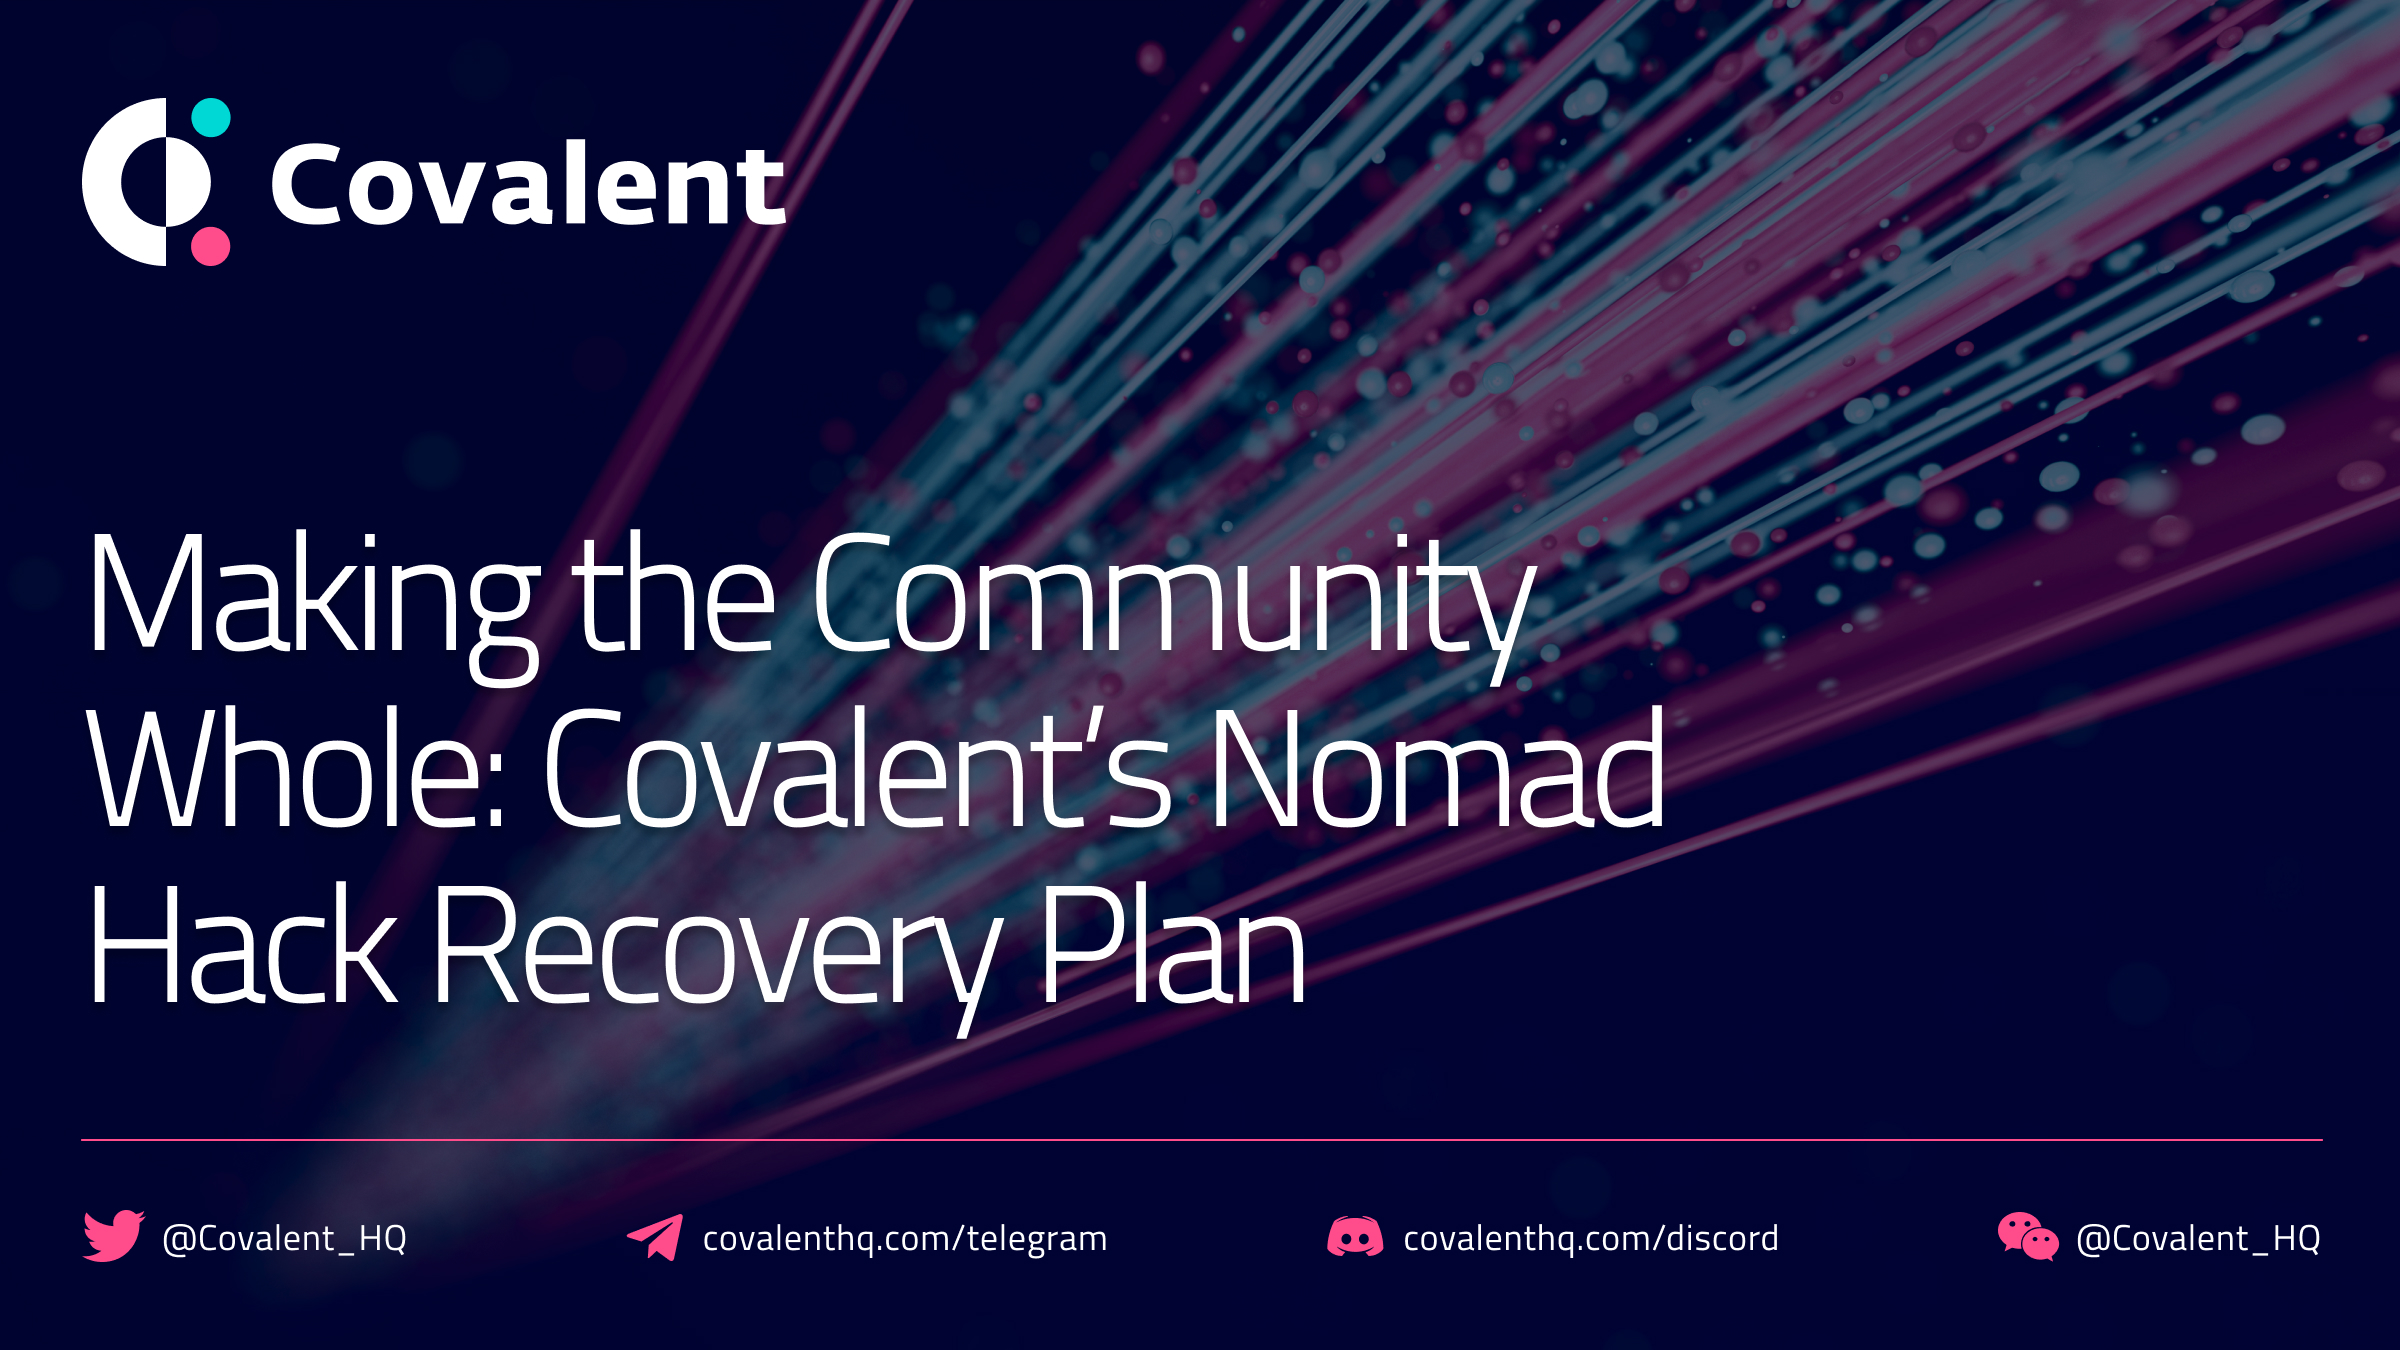 Making the Community Whole: Covalentâ€™s Nomad Hack Recovery Plan